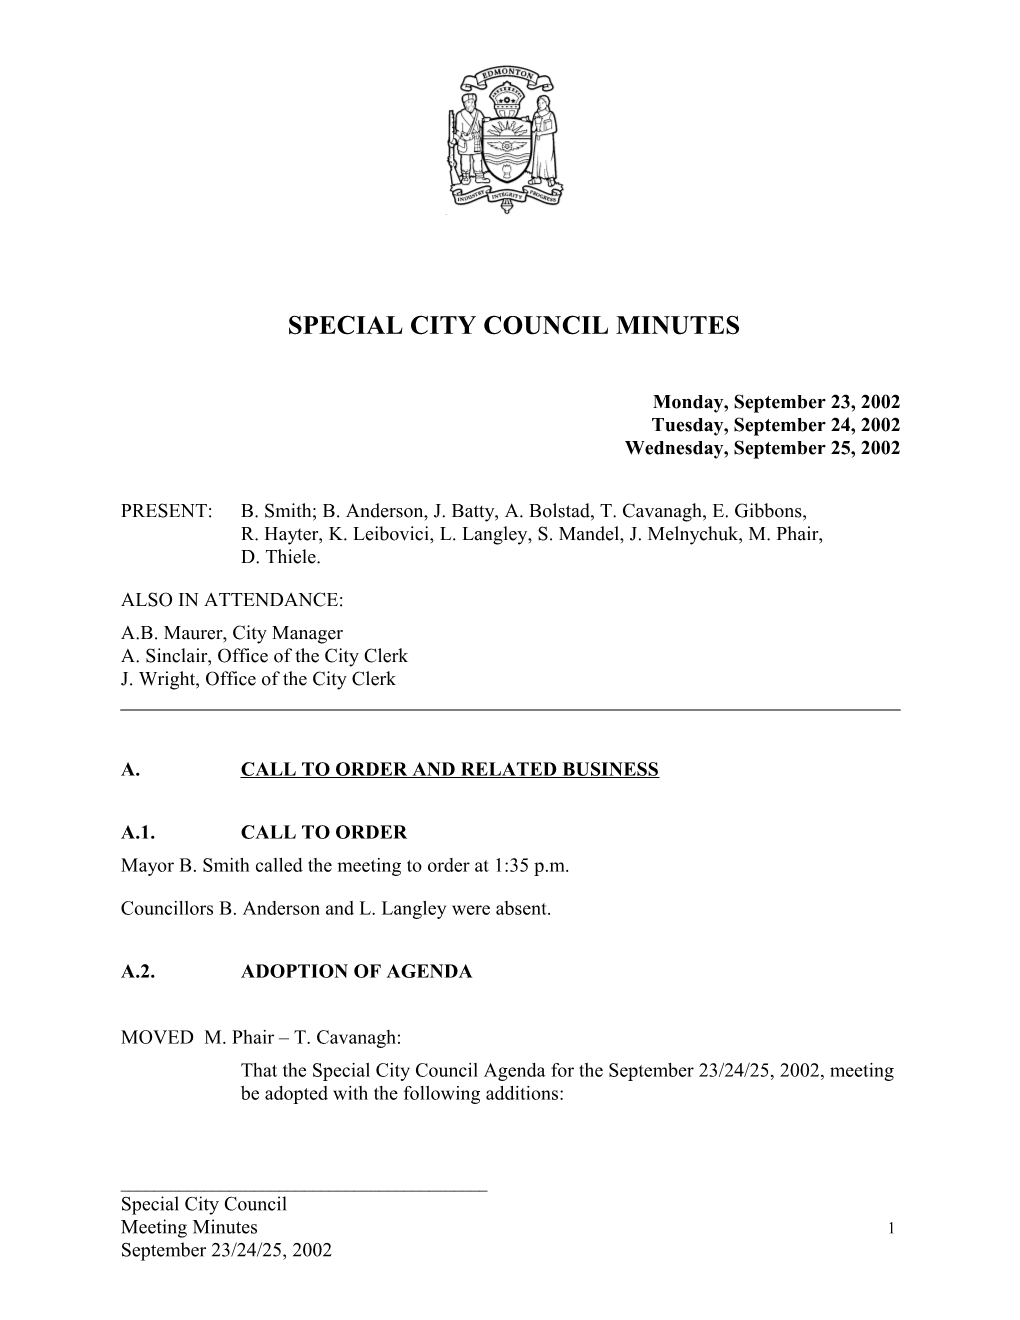 Minutes for City Council September 23, 2002 Meeting